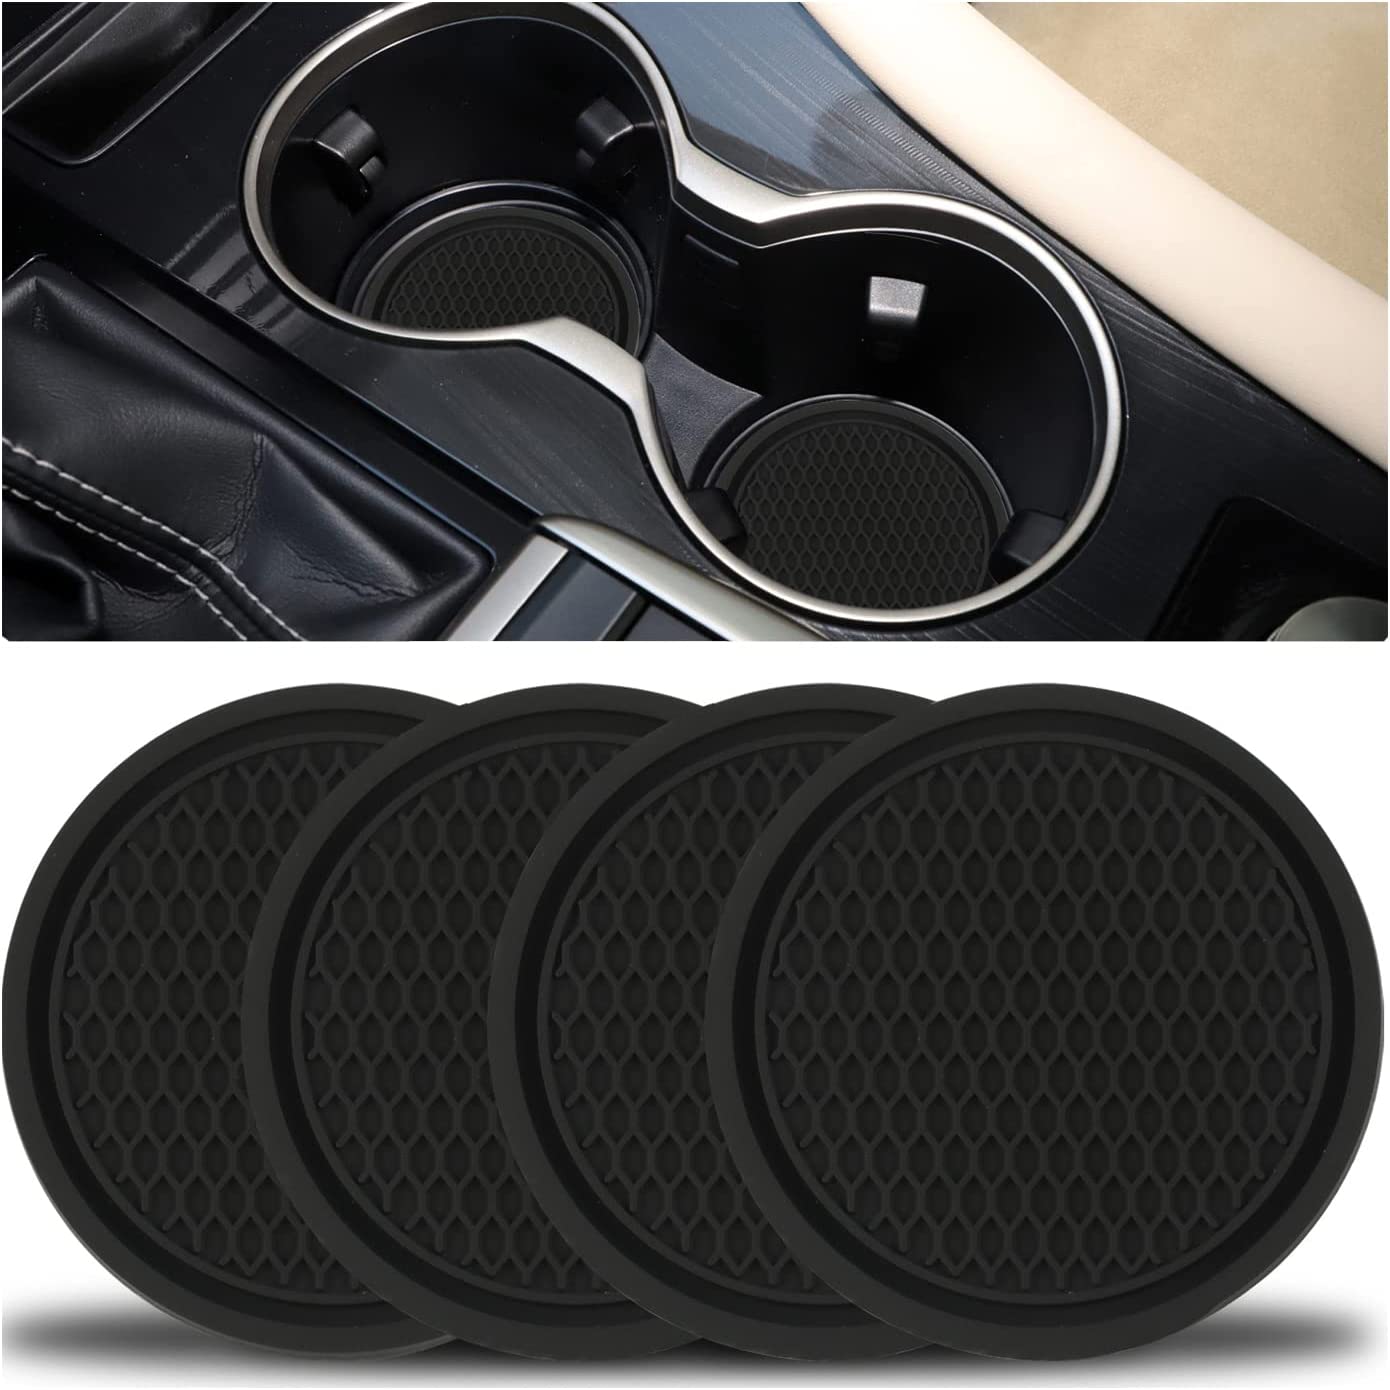 10 Best Car Accessories For Your Car